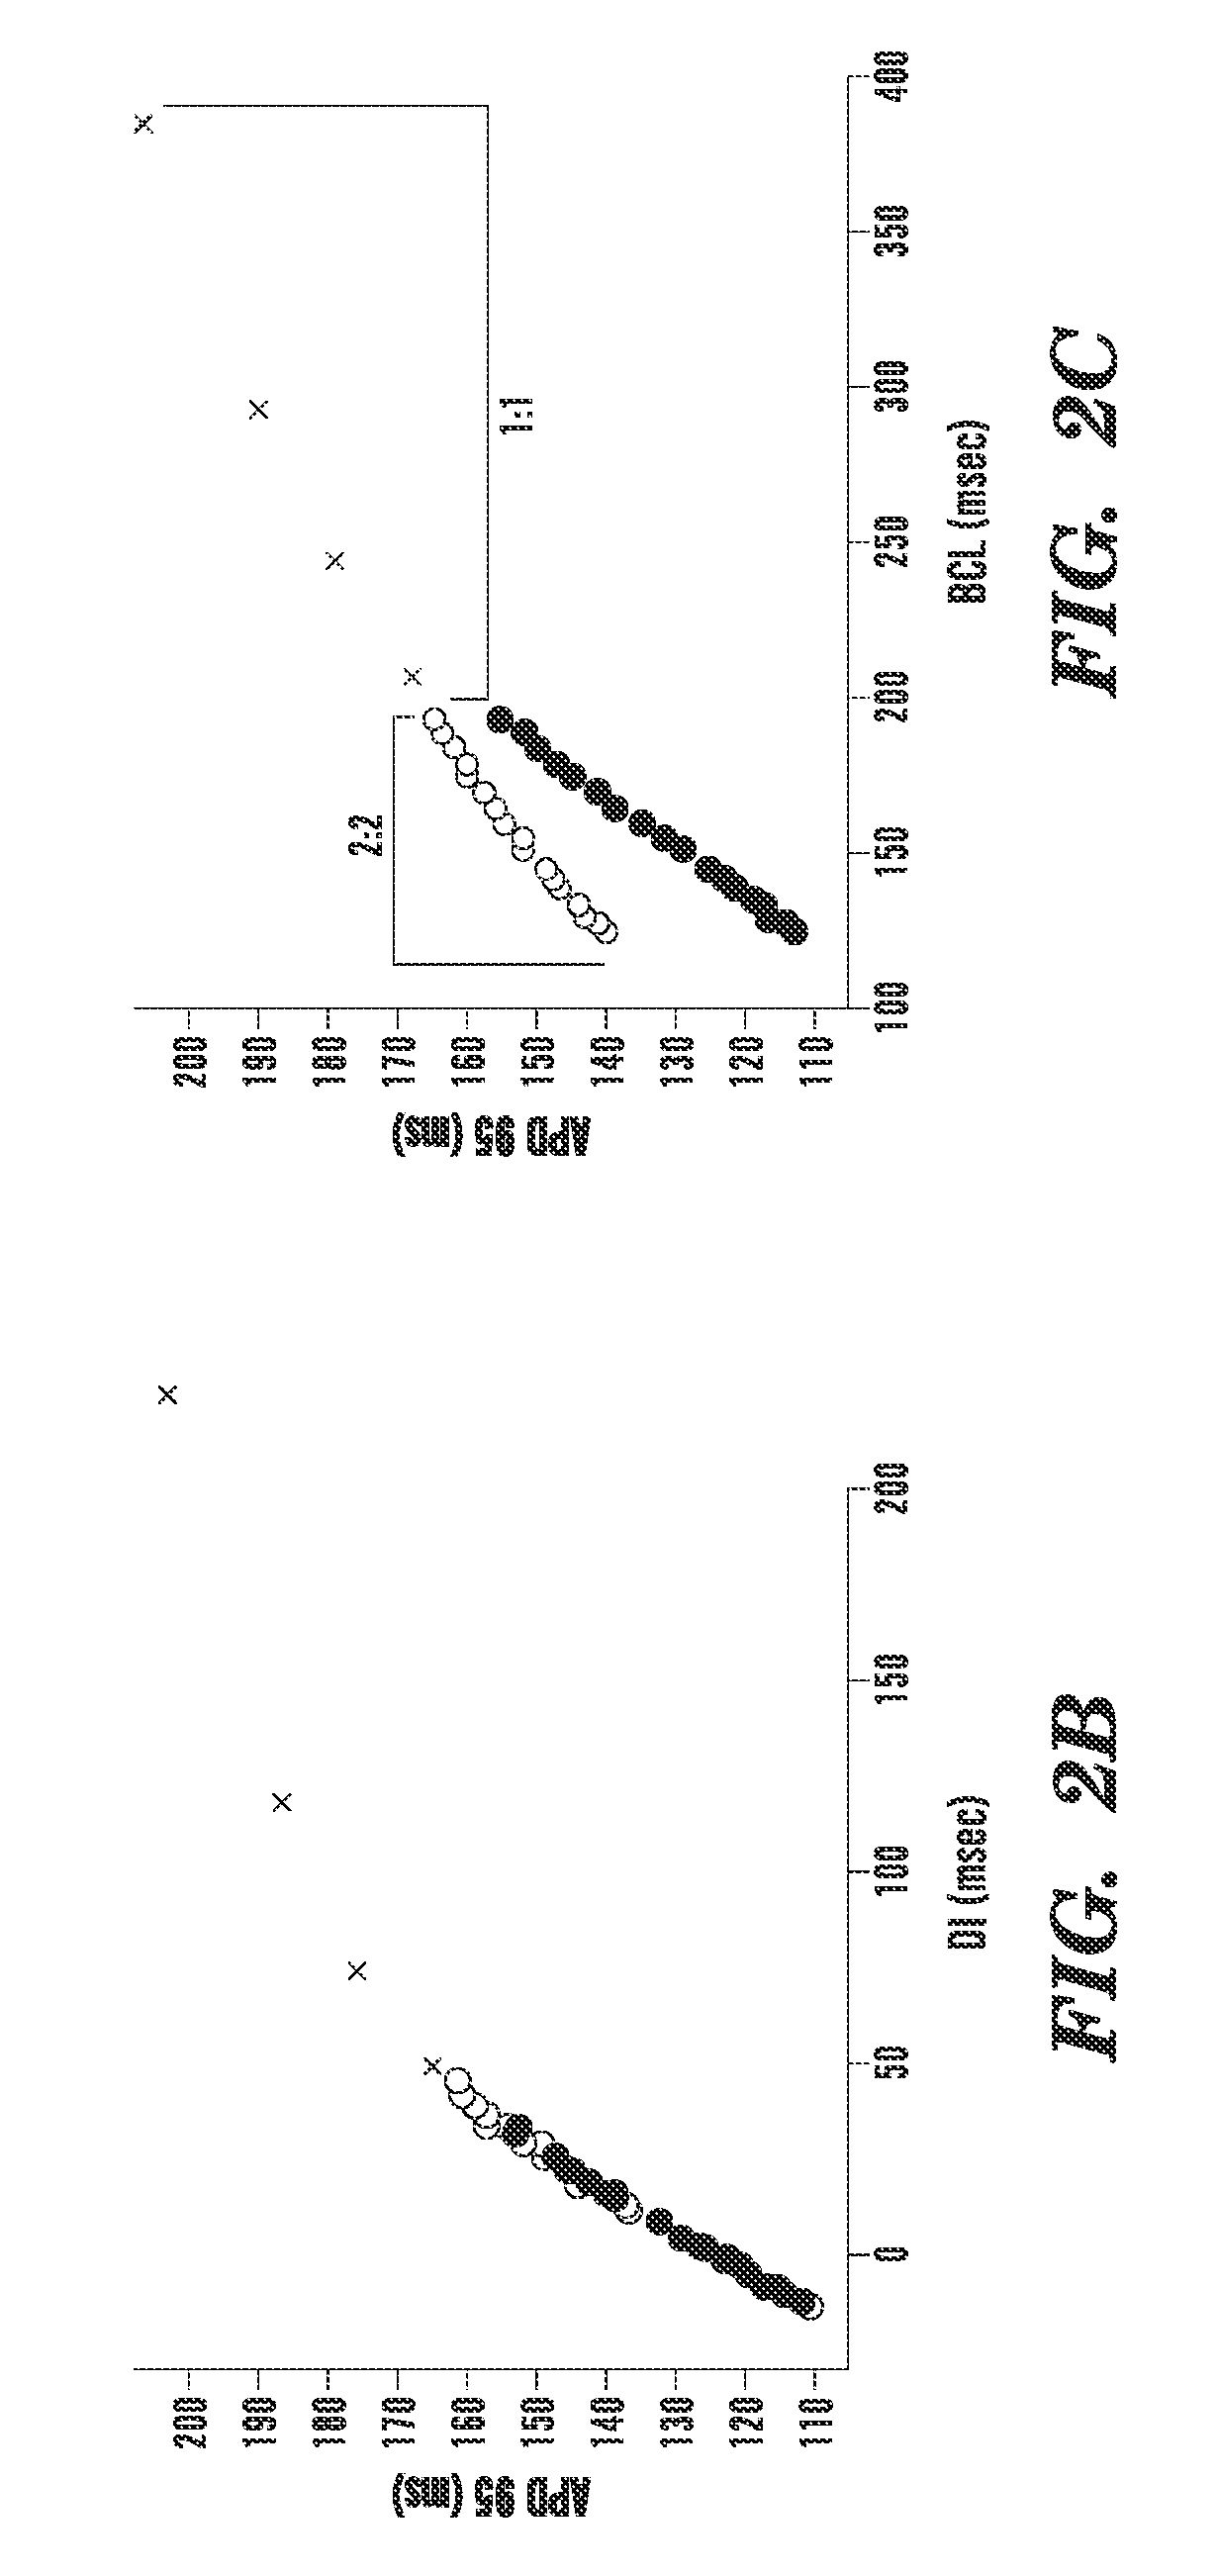 Method of identifying strategies for treatment or prevention of ventricular fibrilation and ventricular tachycardia